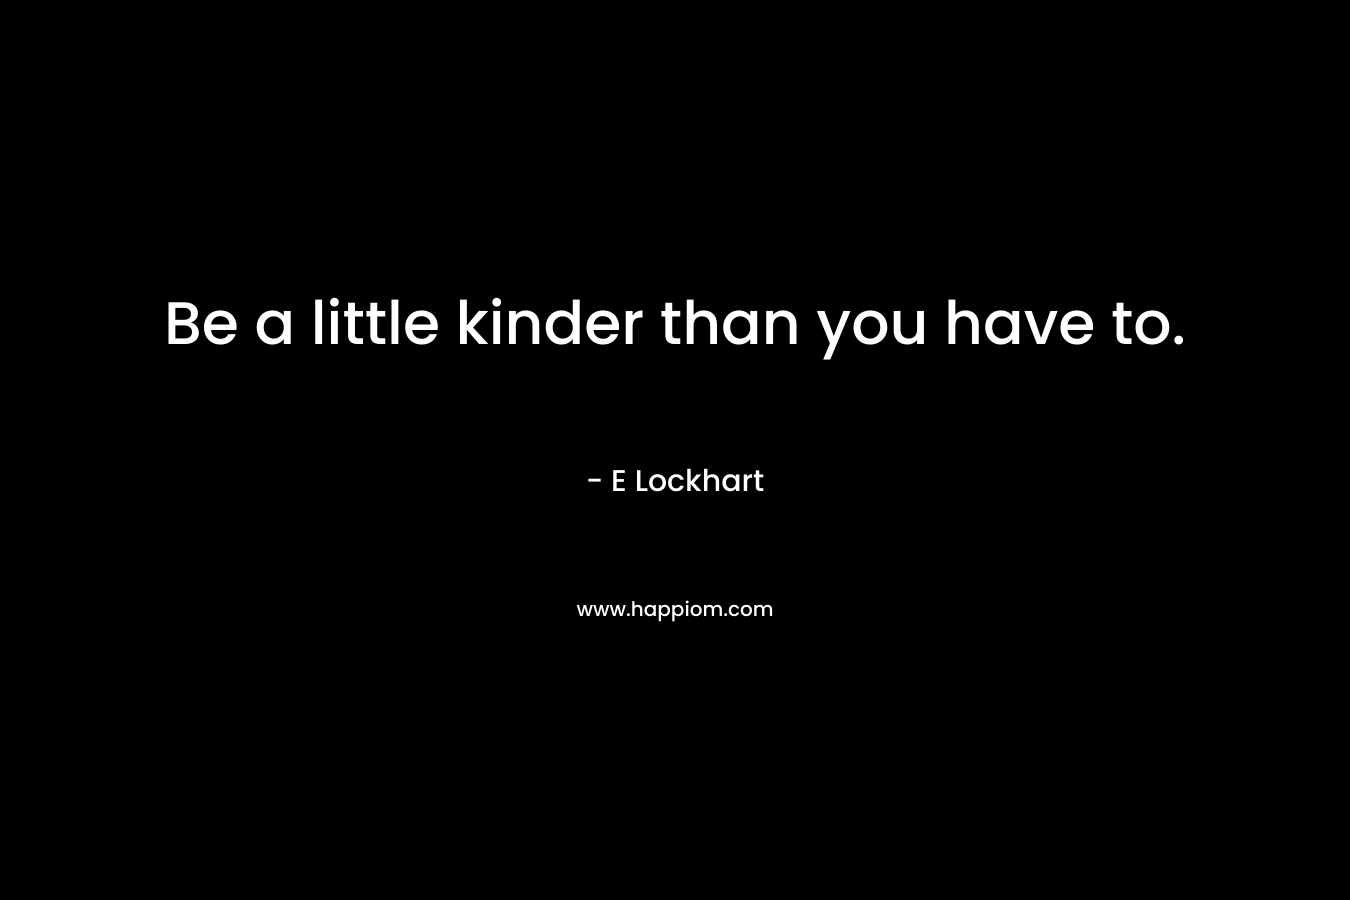 Be a little kinder than you have to.